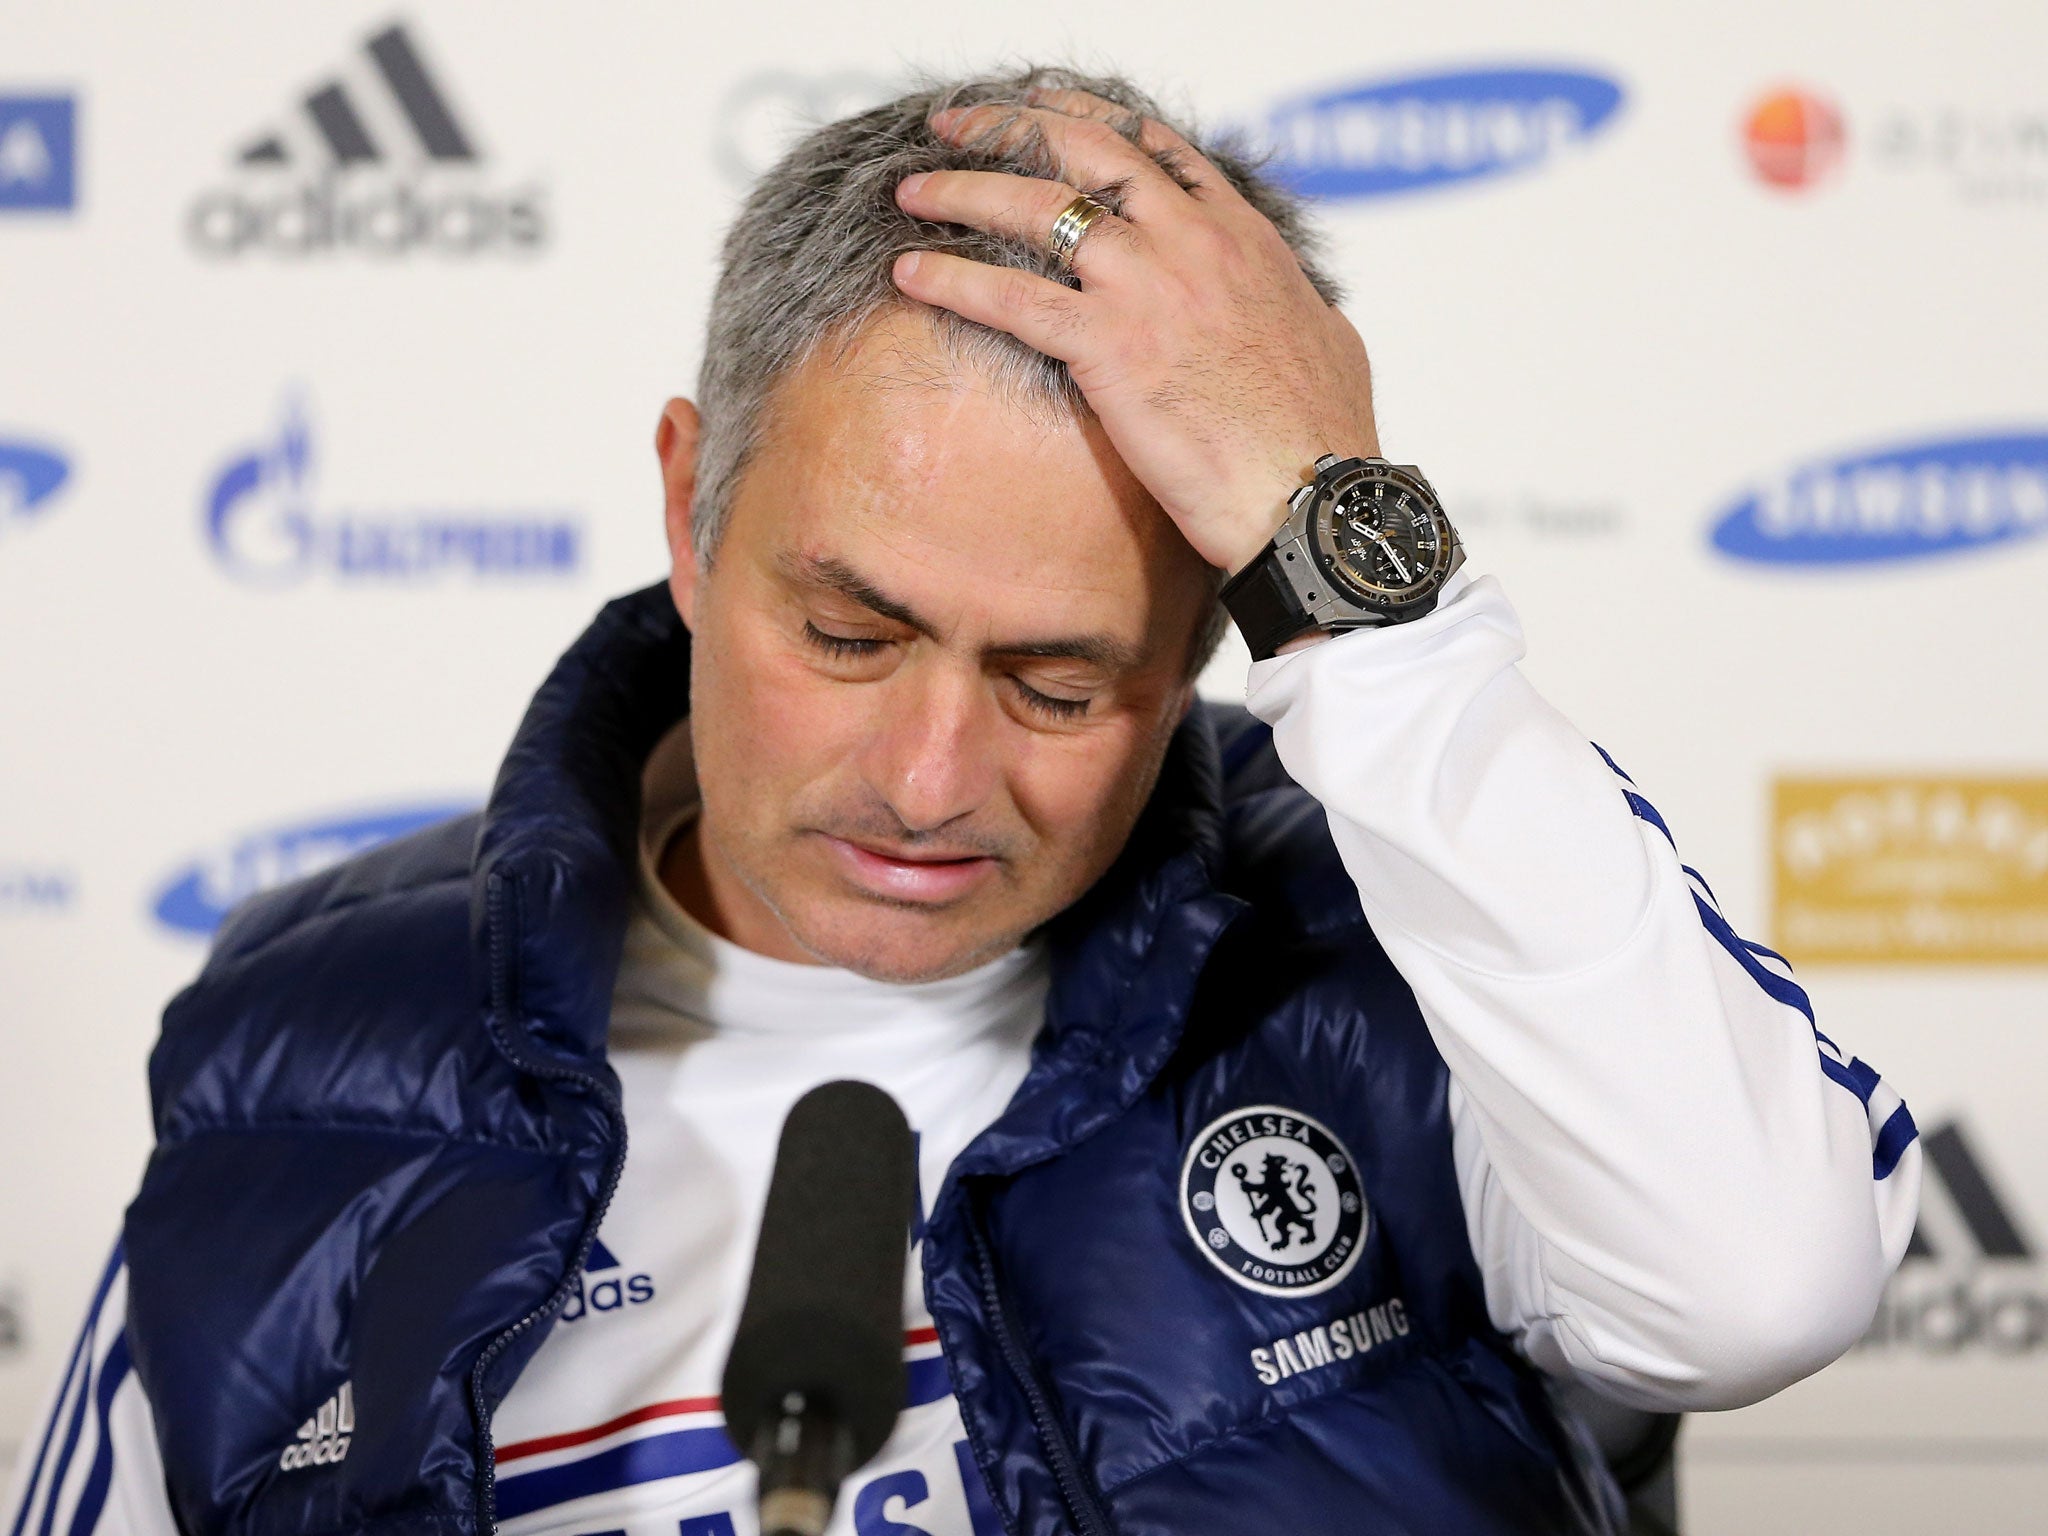 Jose Mourinho is reported to be furious that off-the-record quotes were released by a French television channel